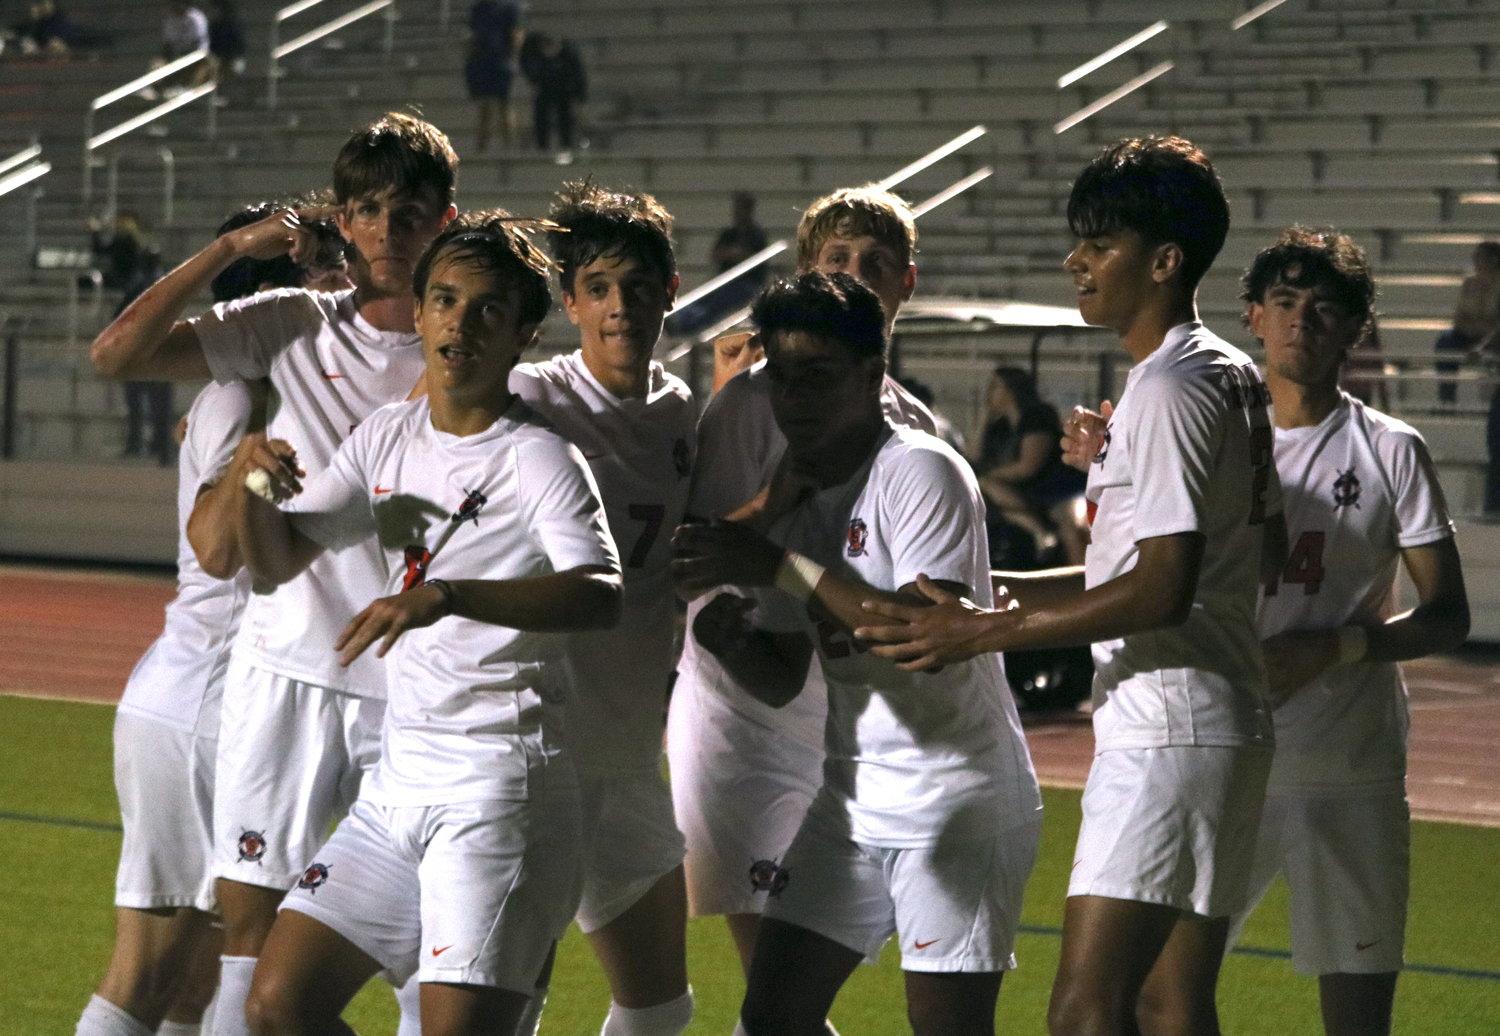 Seven Lakes players celebrate after scoring a goal during Tuesday's District 19-6A game between Seven Lakes and Paetow at the Paetow soccer field.